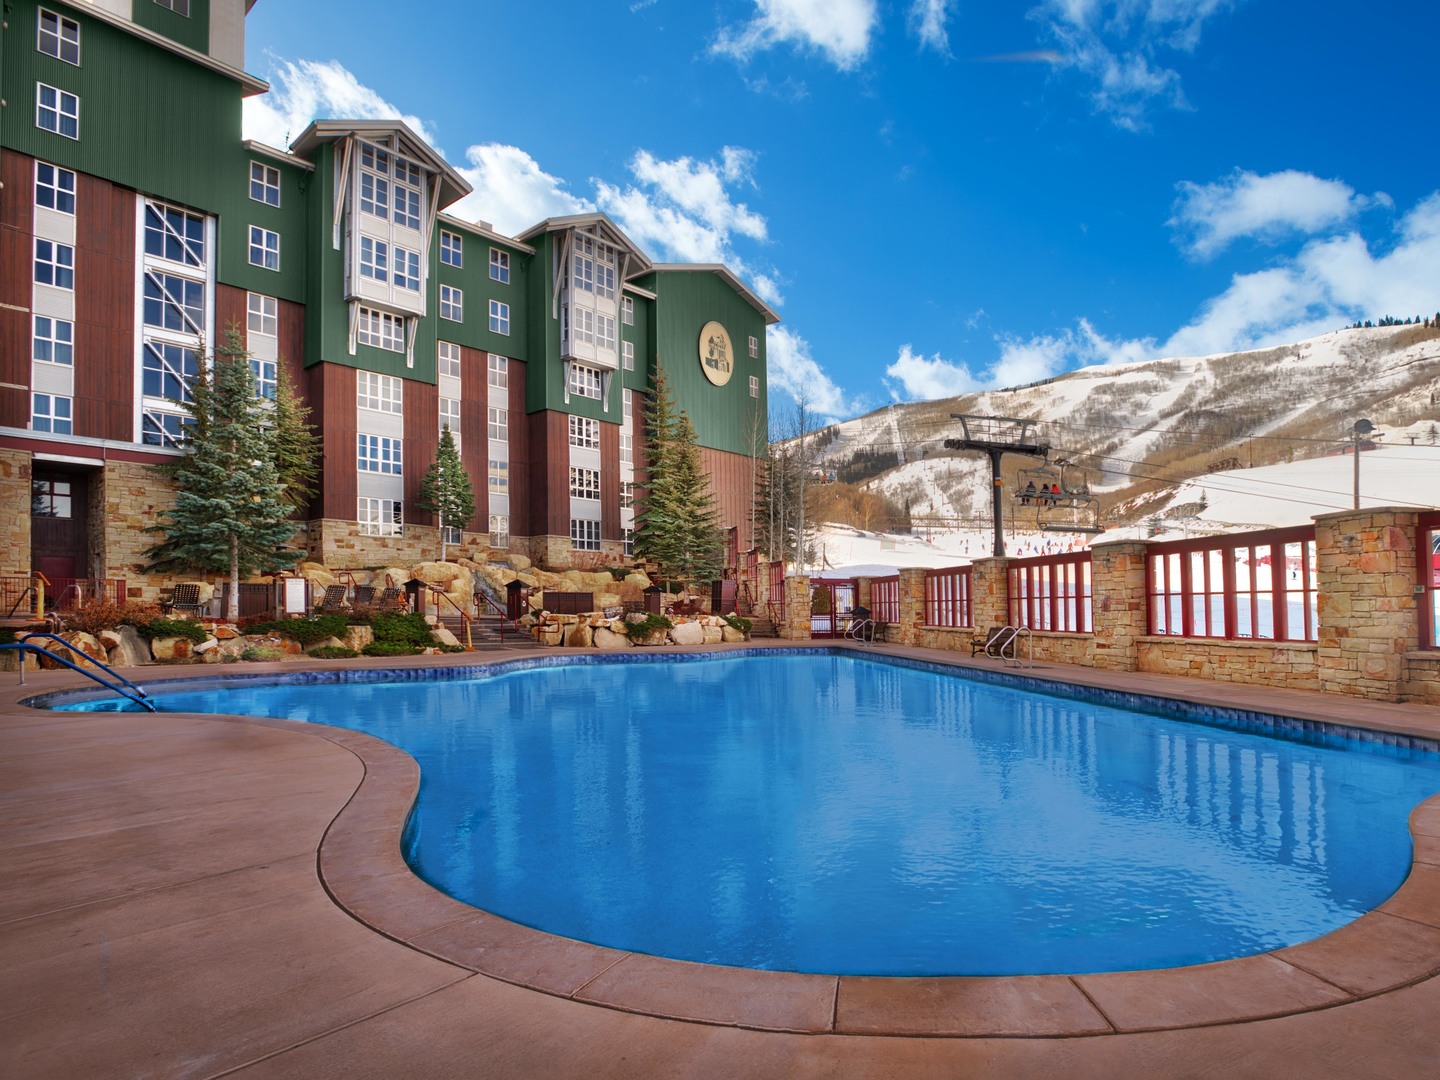 Marriott's MountainSide Pool. Marriott's MountainSide is located in Park City, Utah United States.